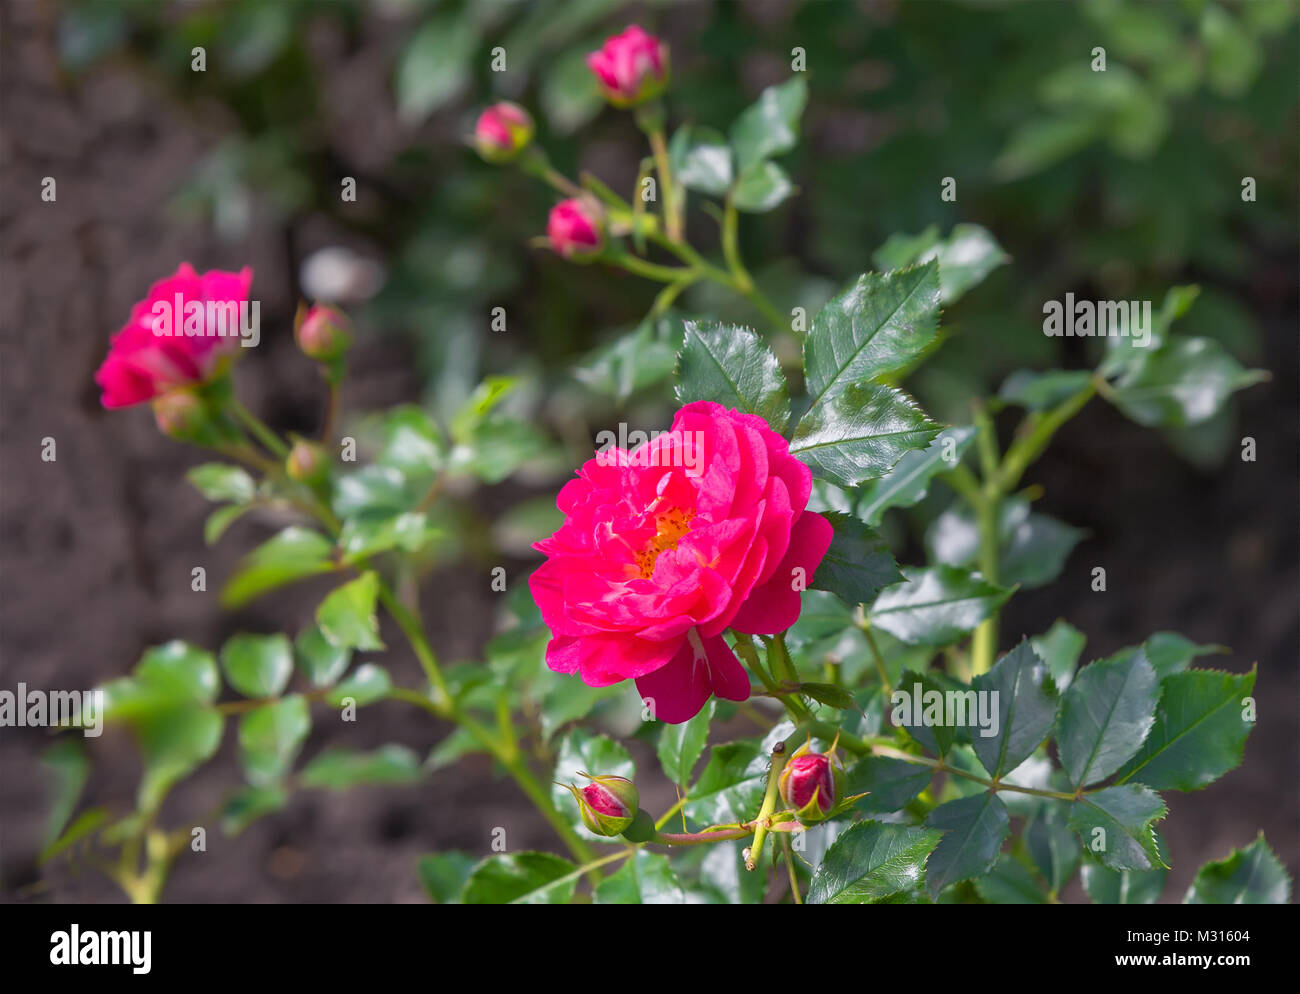 Pink rose flowers in a garden. Stock Photo